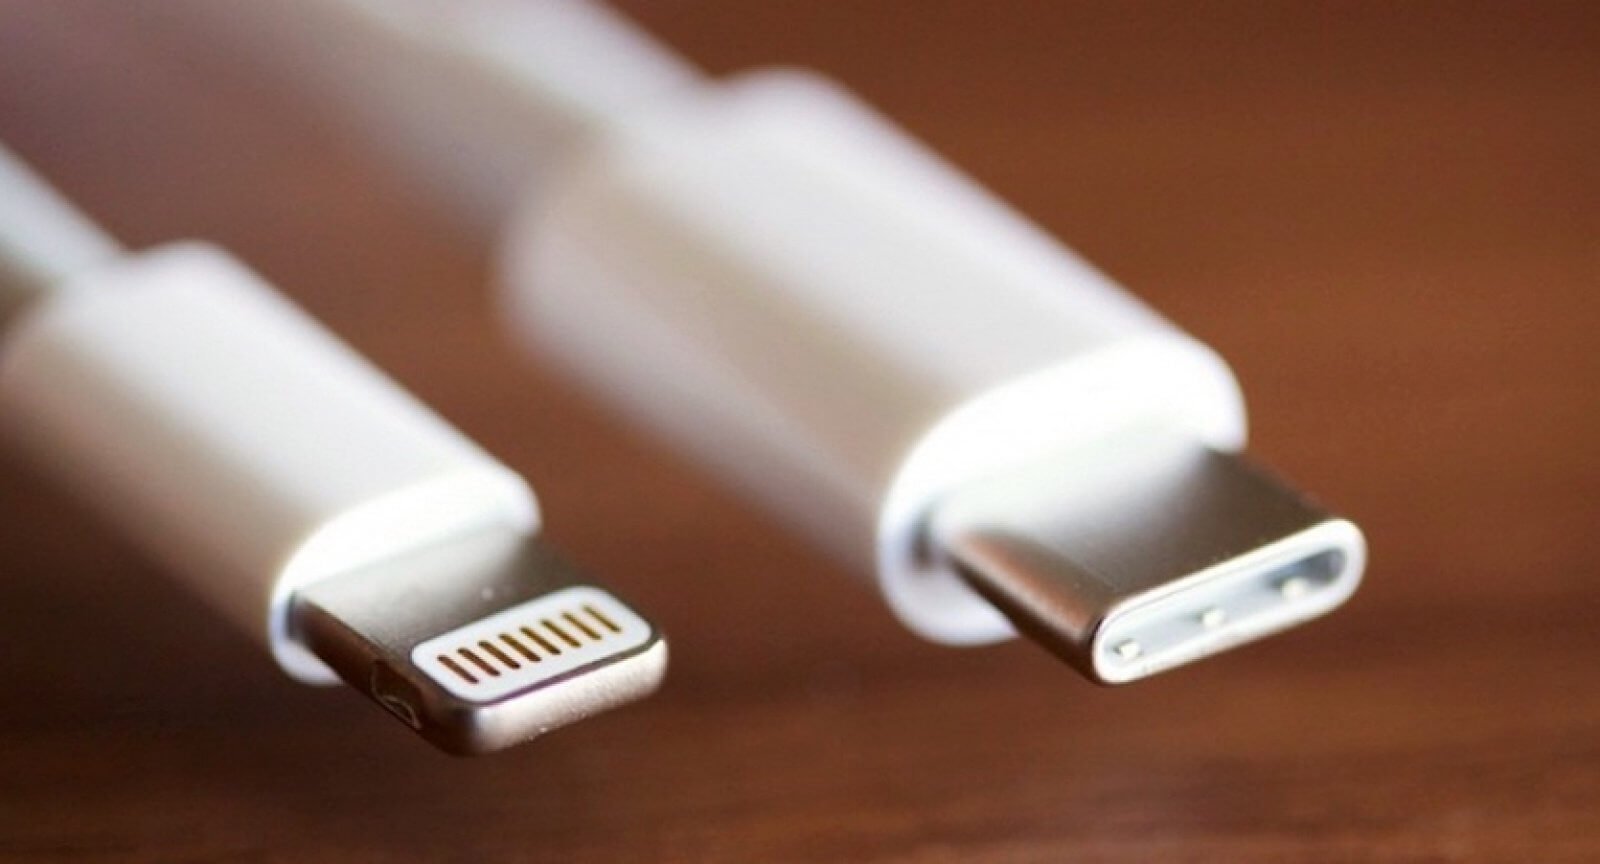 EU disagrees with Apple that USB-C transition hurts innovation